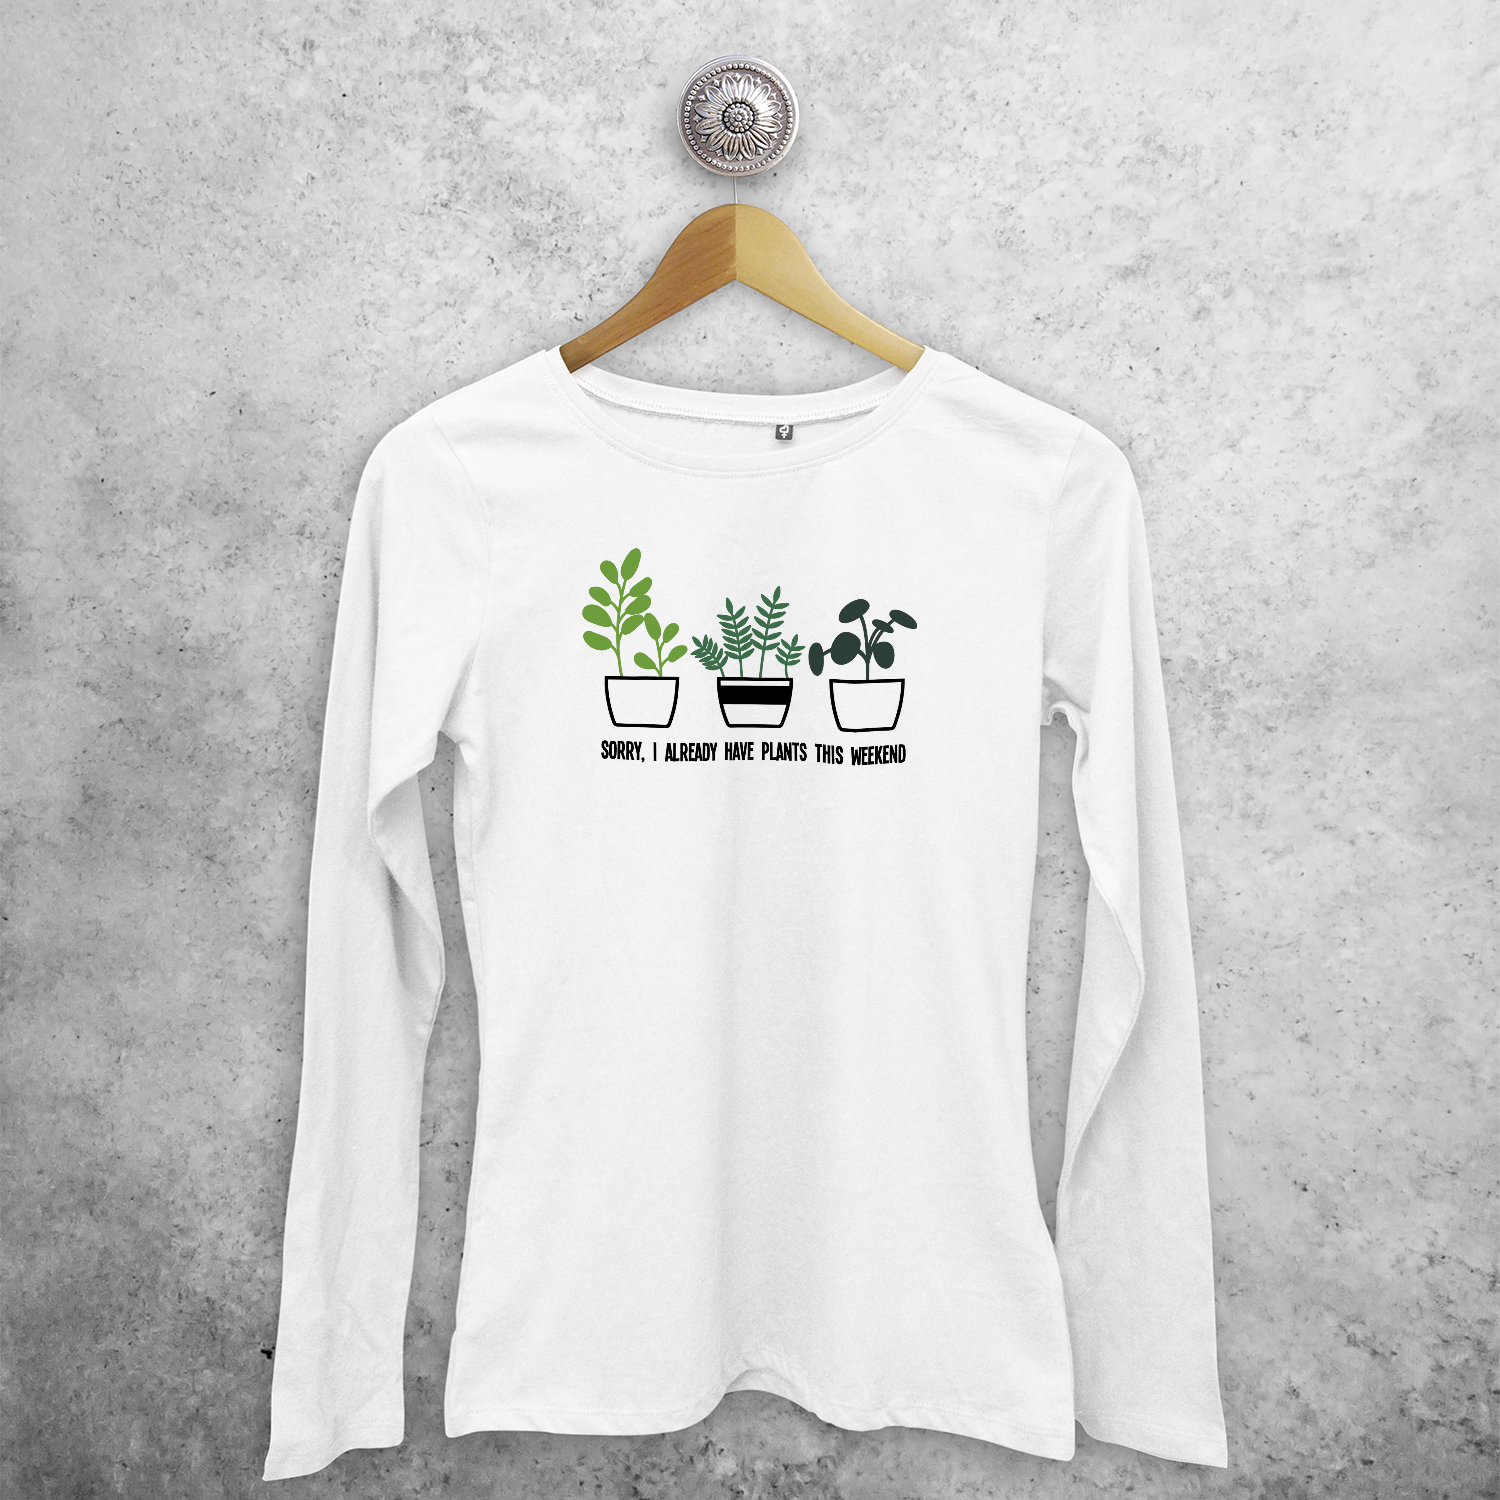 ‘Sorry, I already have plants this weekend’ adult longsleeve shirt